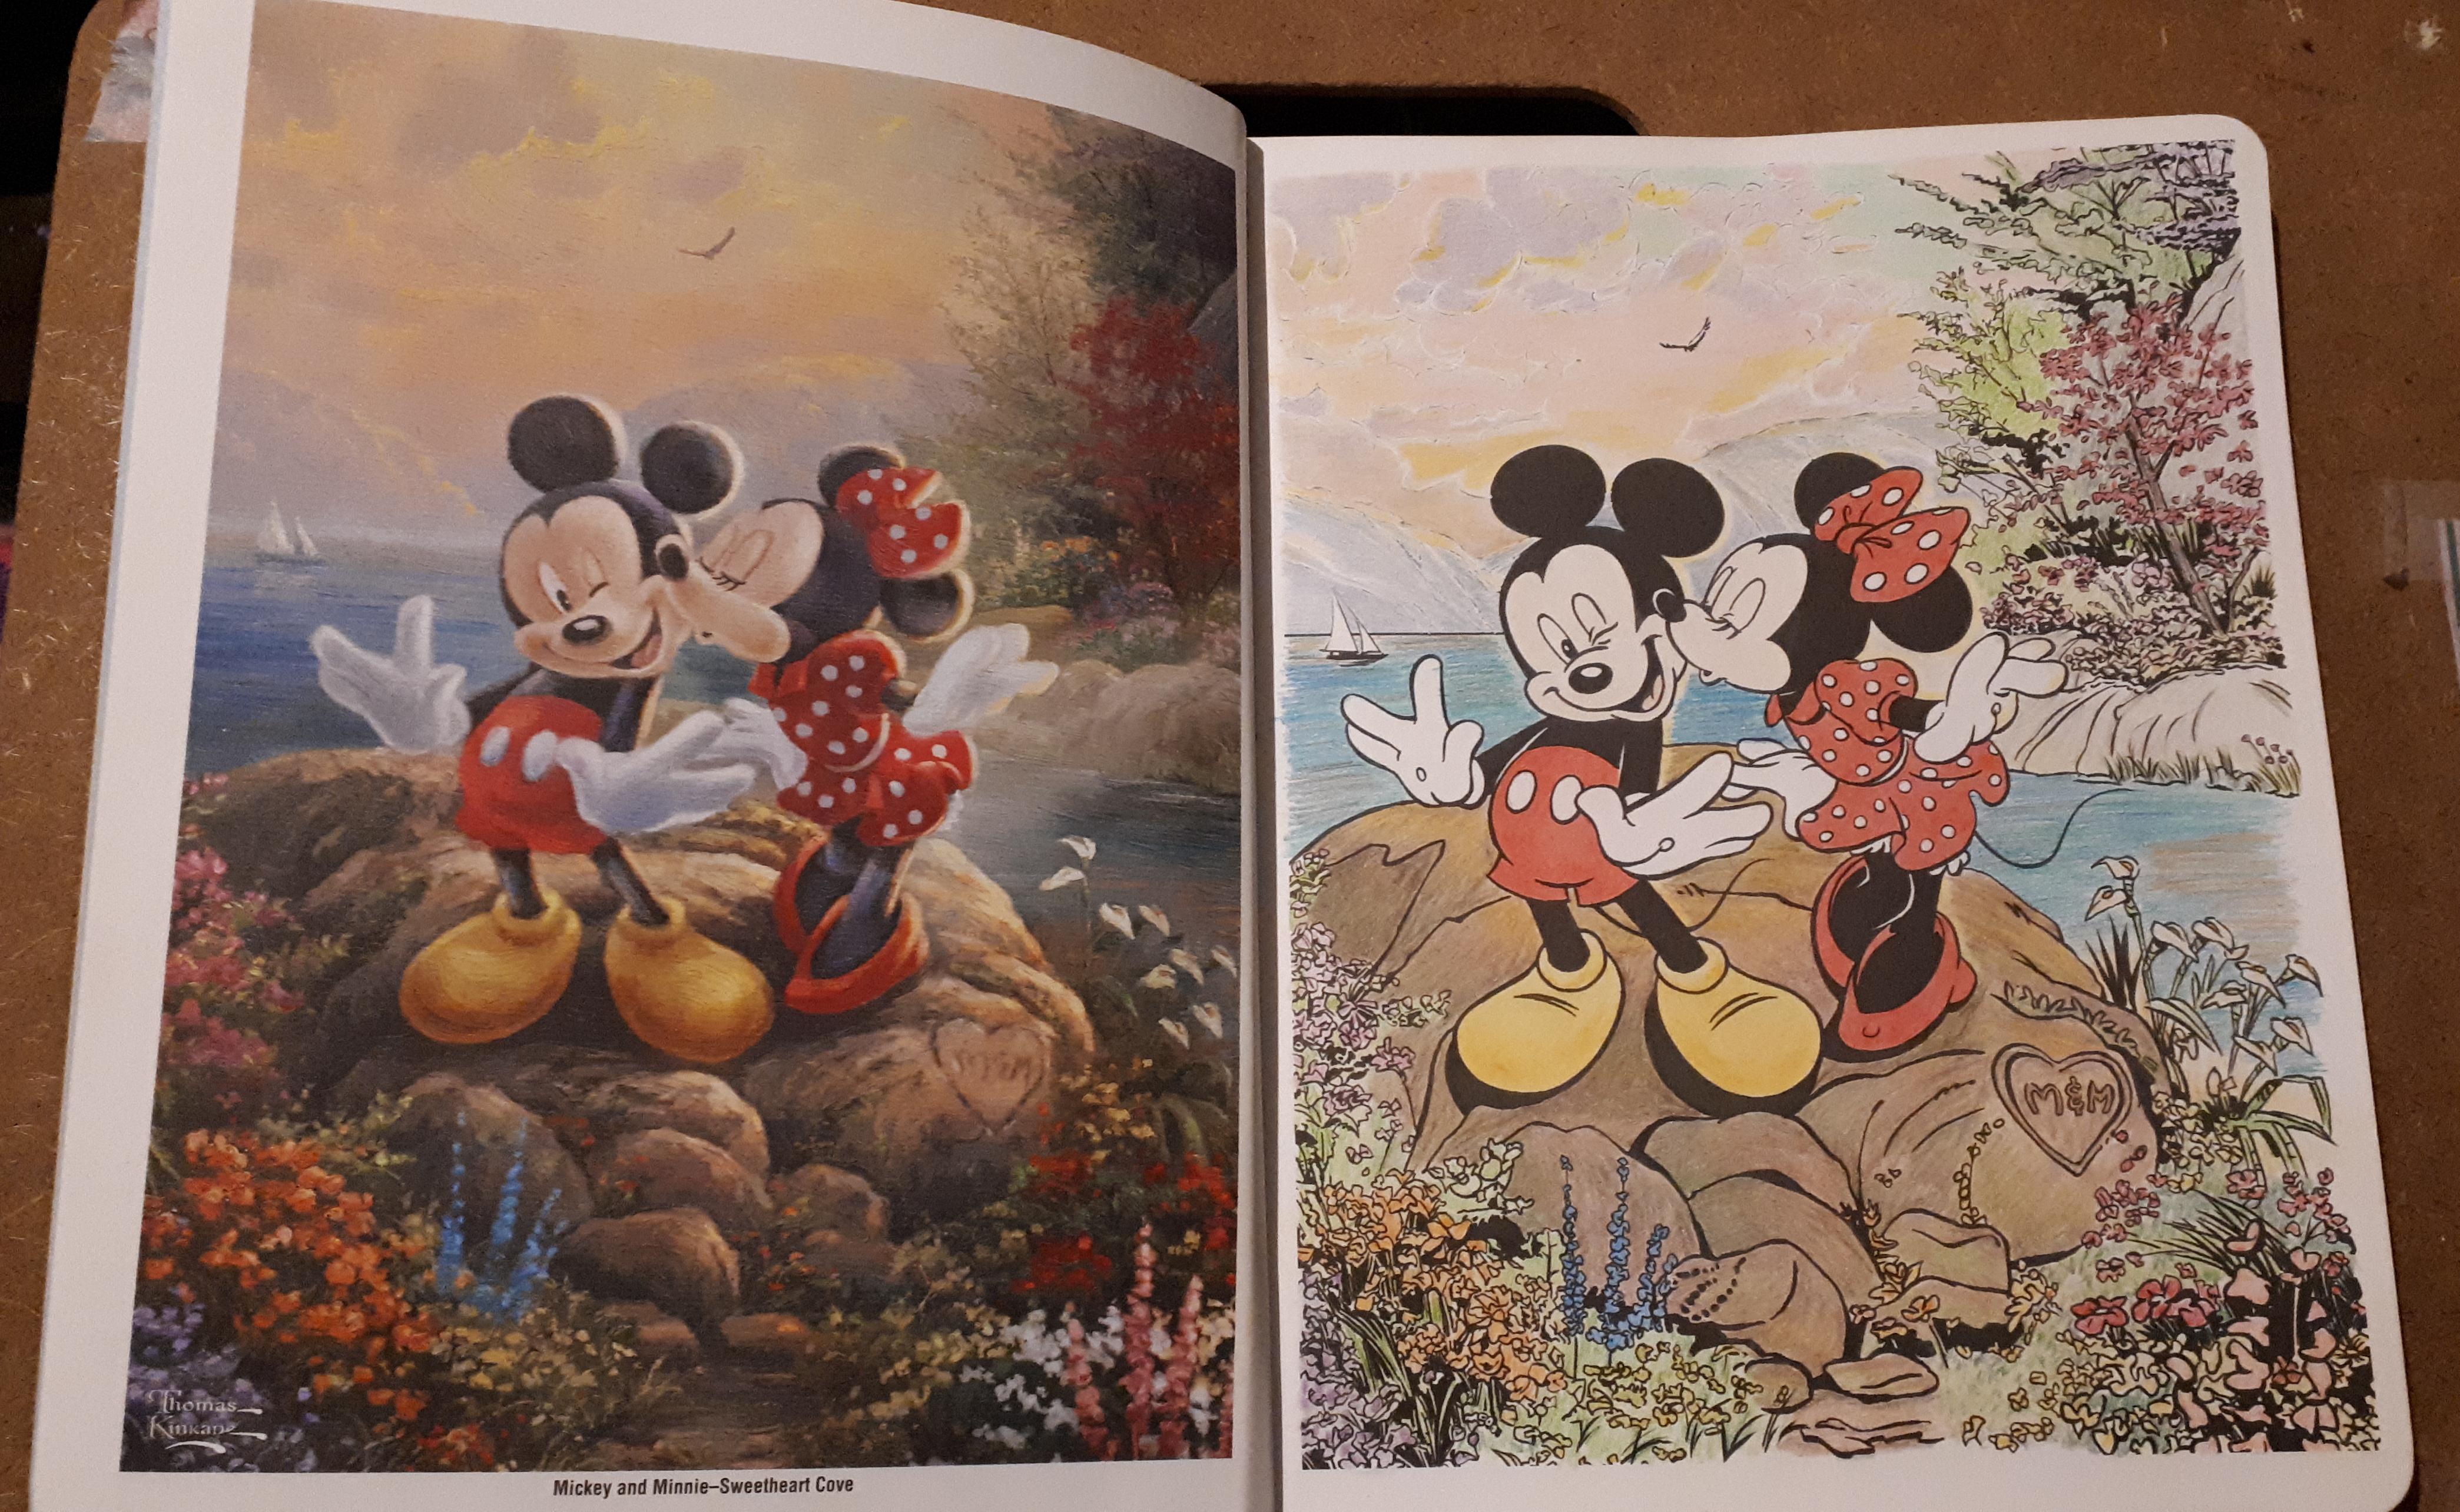 Put this down long time ago and finally went back to it over all happy with end result book is disney dream collection based on thomas kinkades oil paintings rcoloring